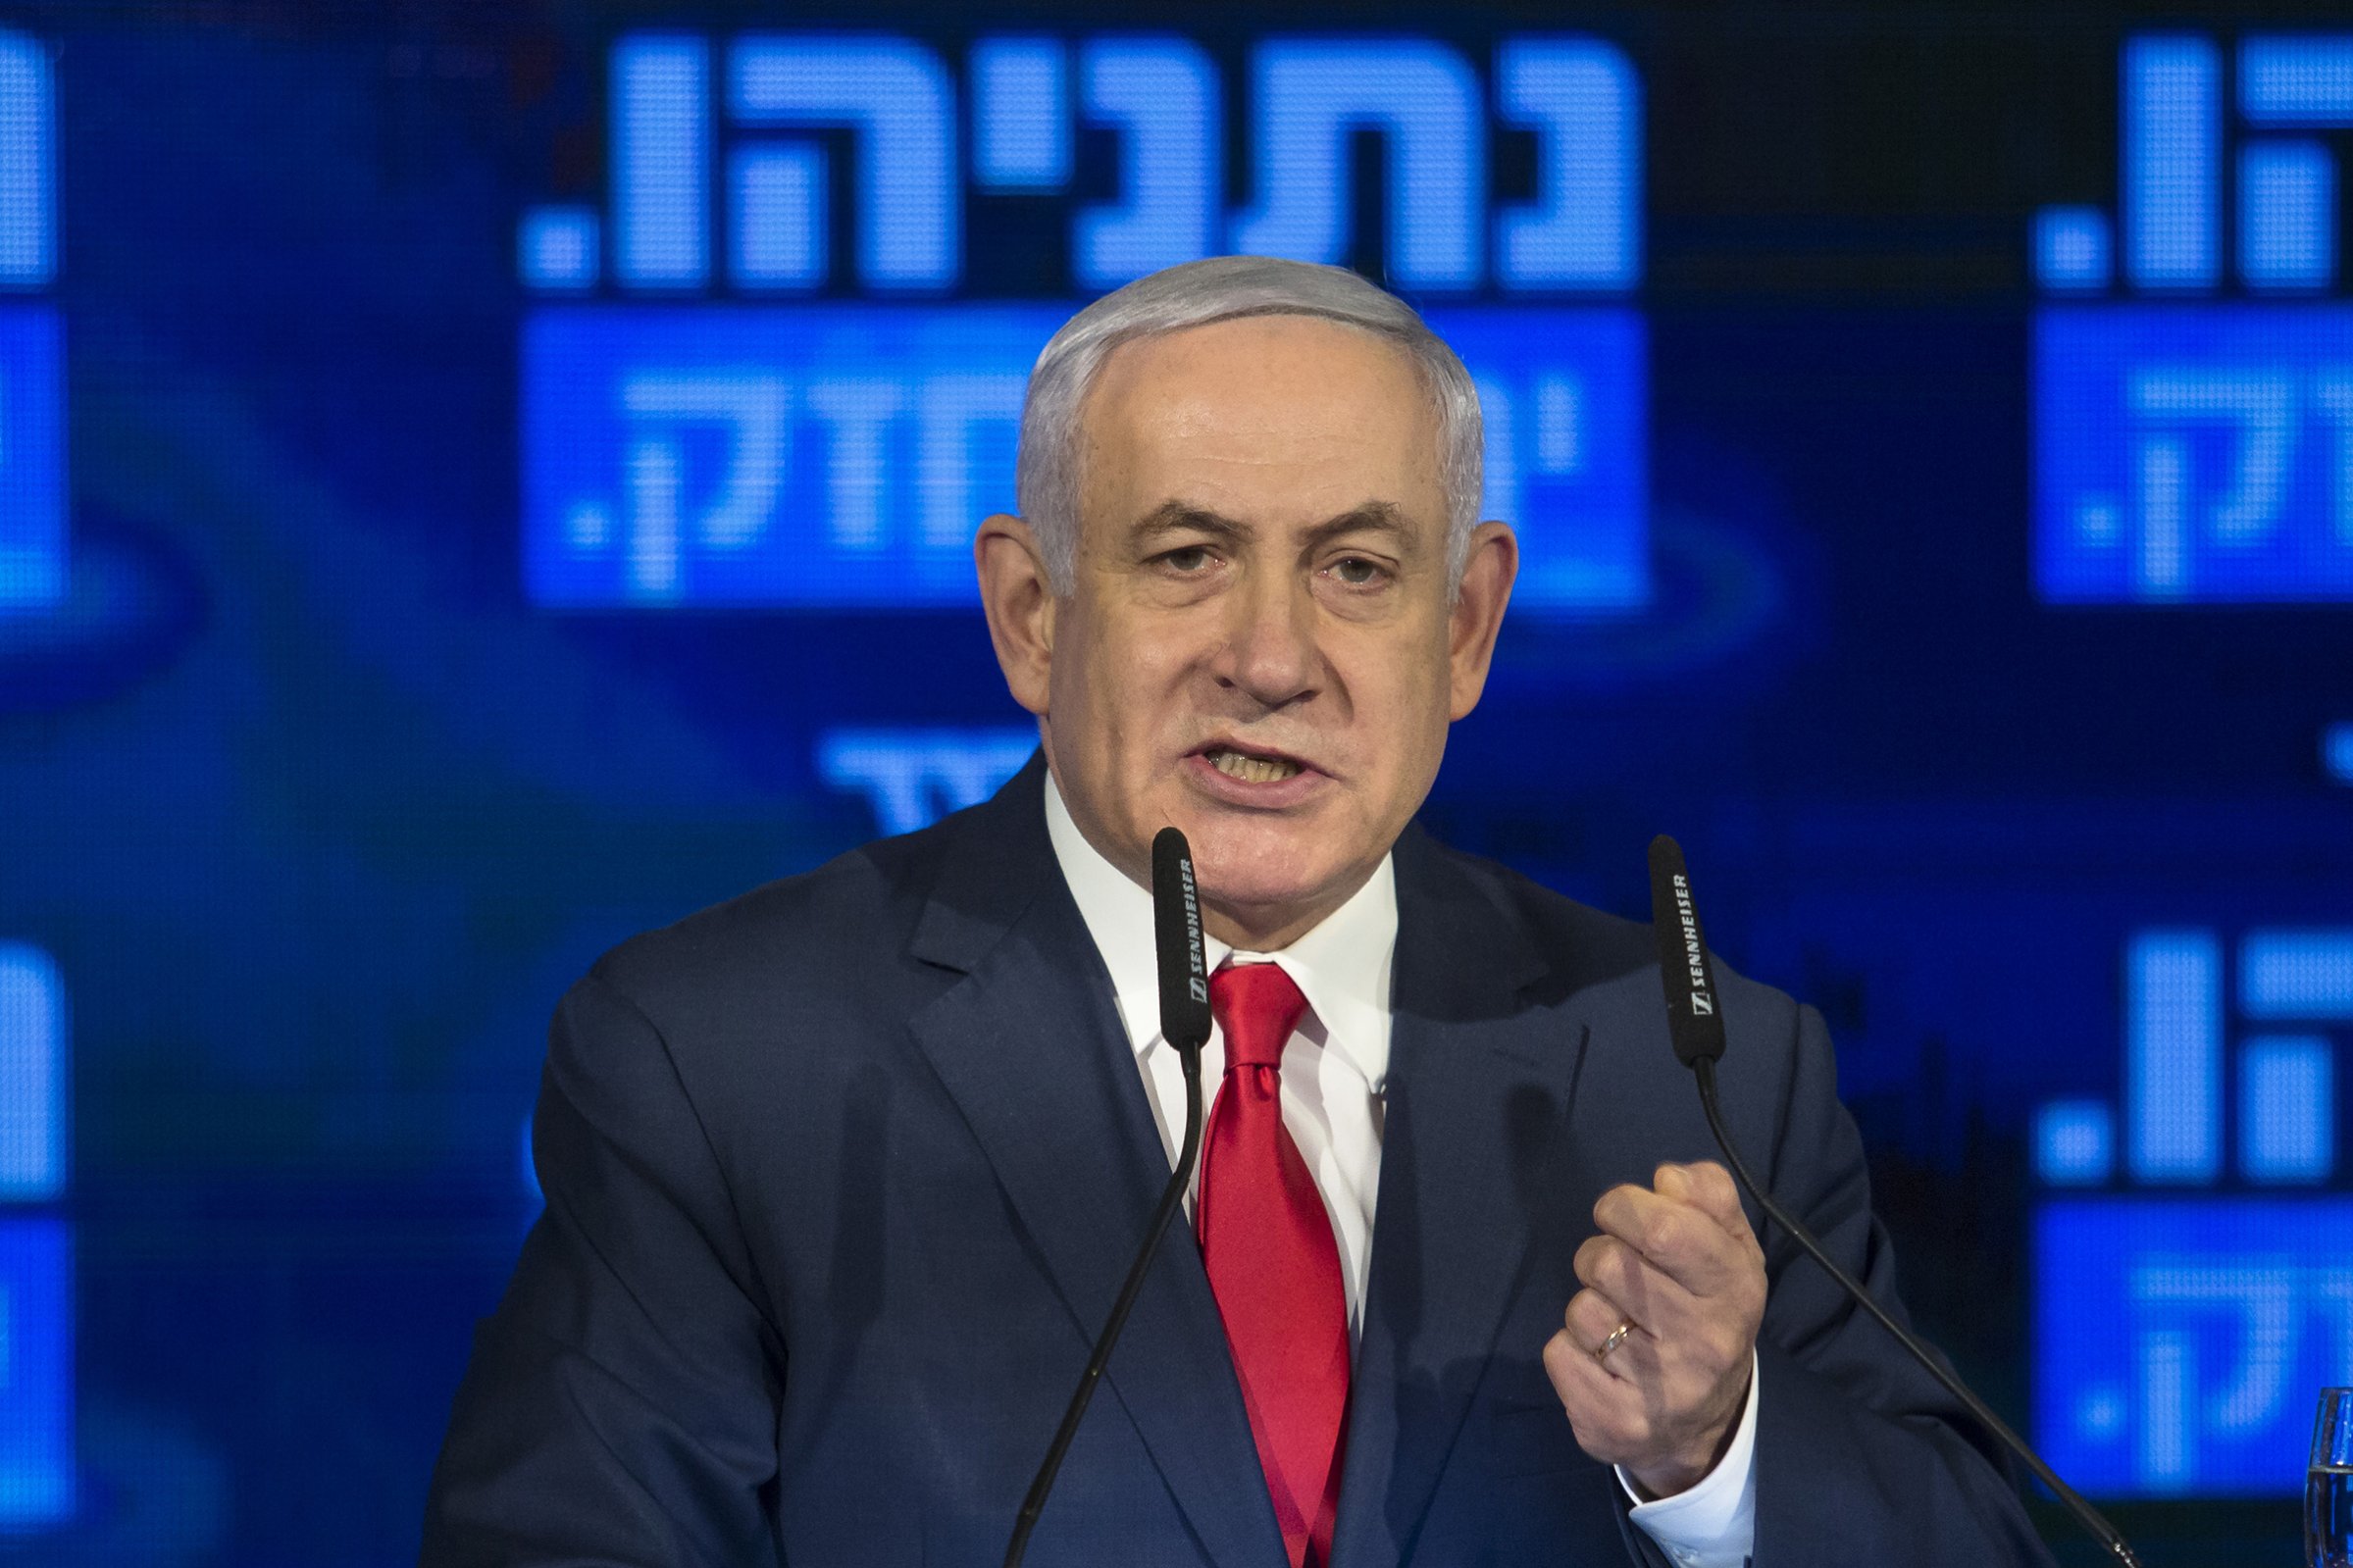 Israel's Prime Minster Benjamin Netanyahu delivers a speech on March 4, 2019